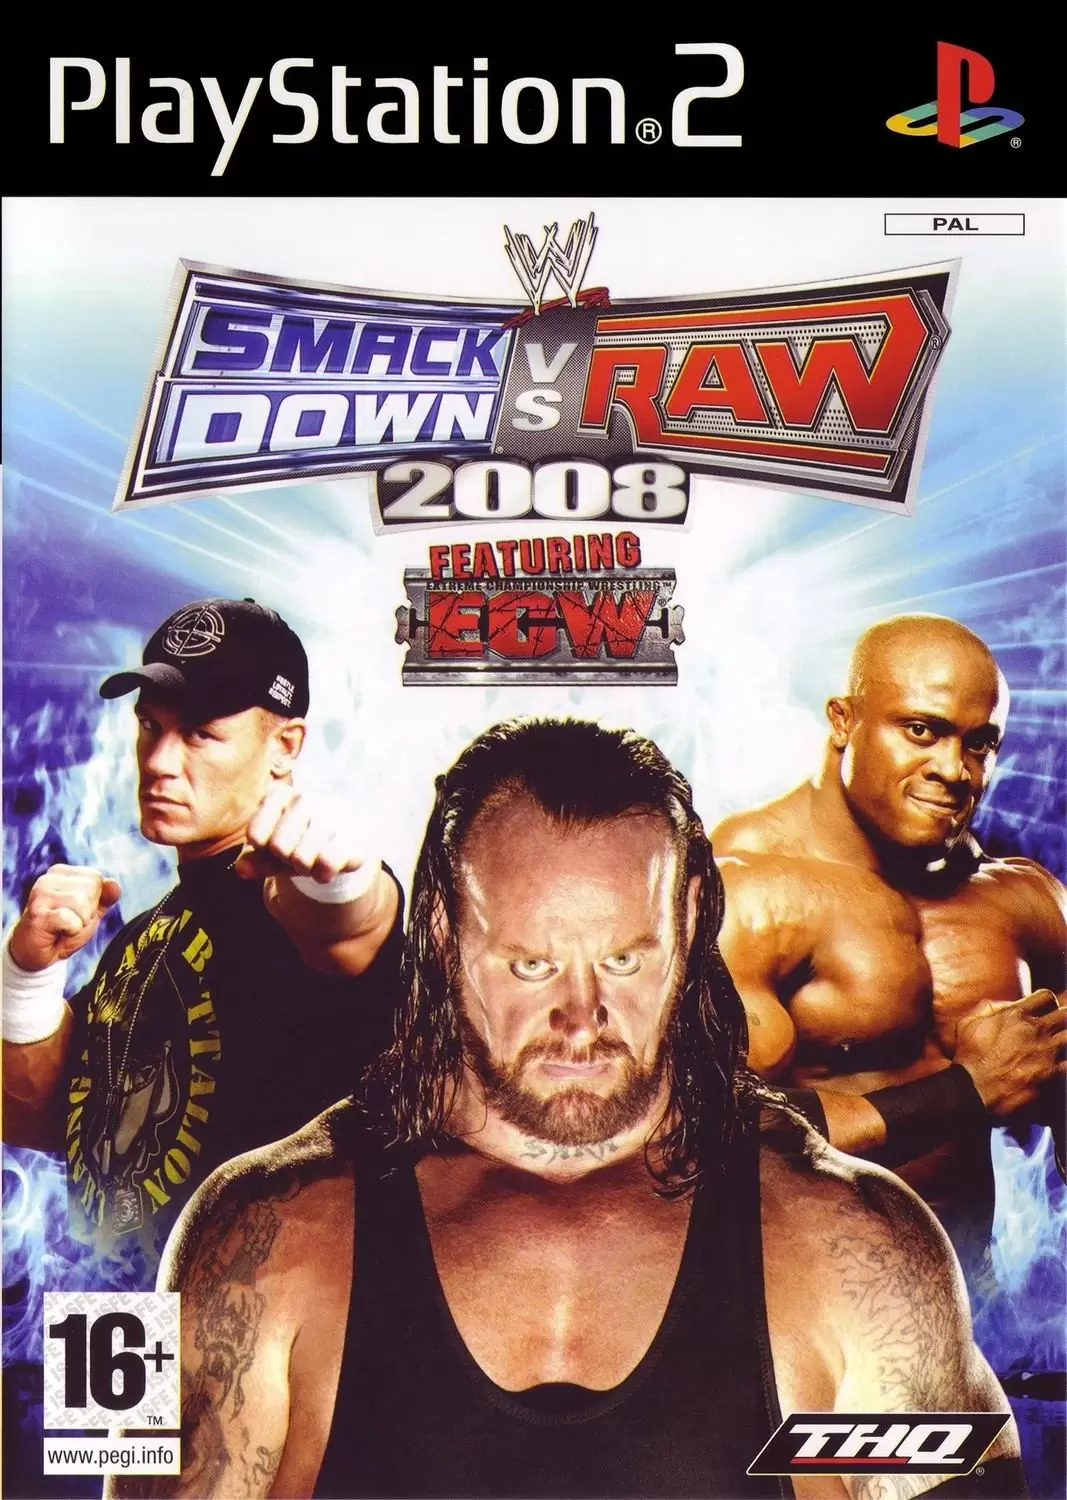 PS2 Games - WWE SmackDown vs. Raw 2008